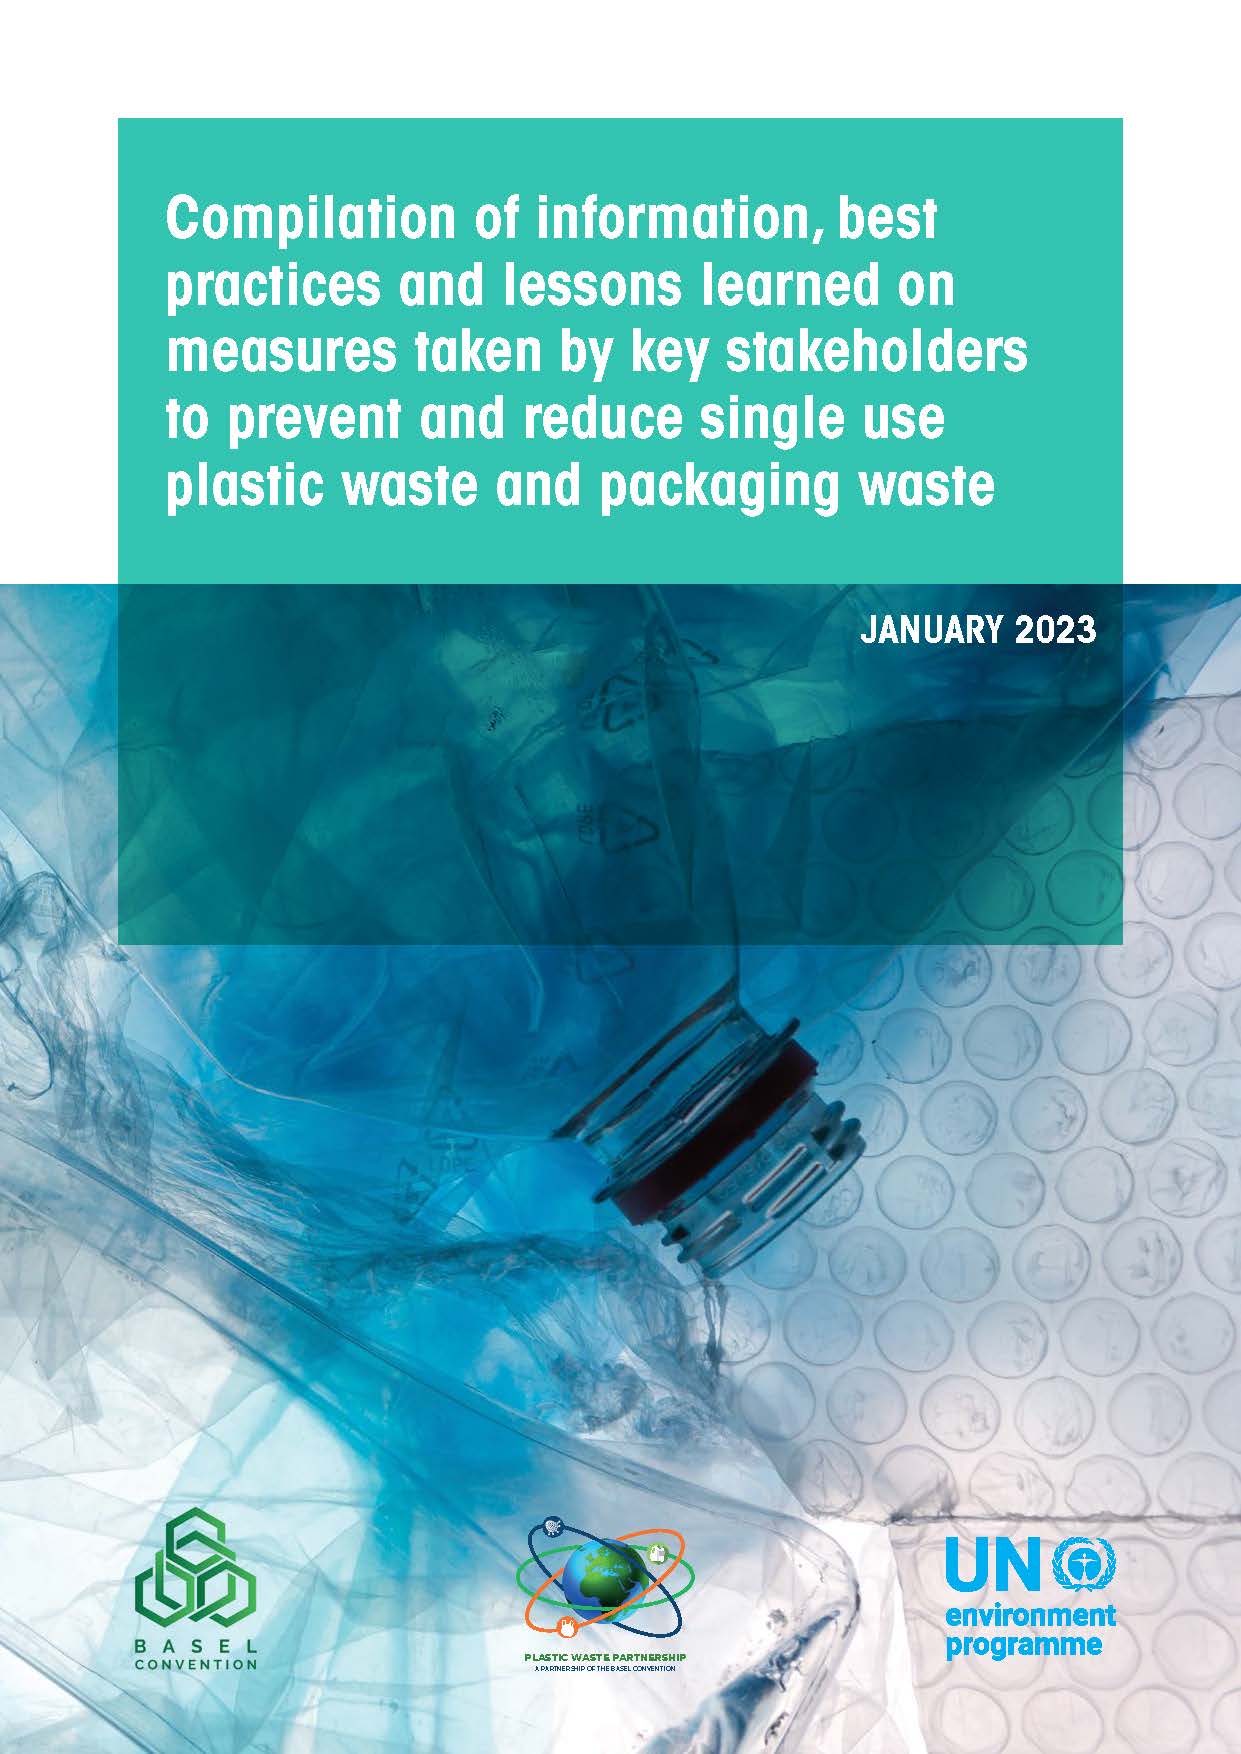 Compilation of information, best practices and lessons learned on measures taken by key stakeholders to prevent and reduce single use plastic waste and packaging waste